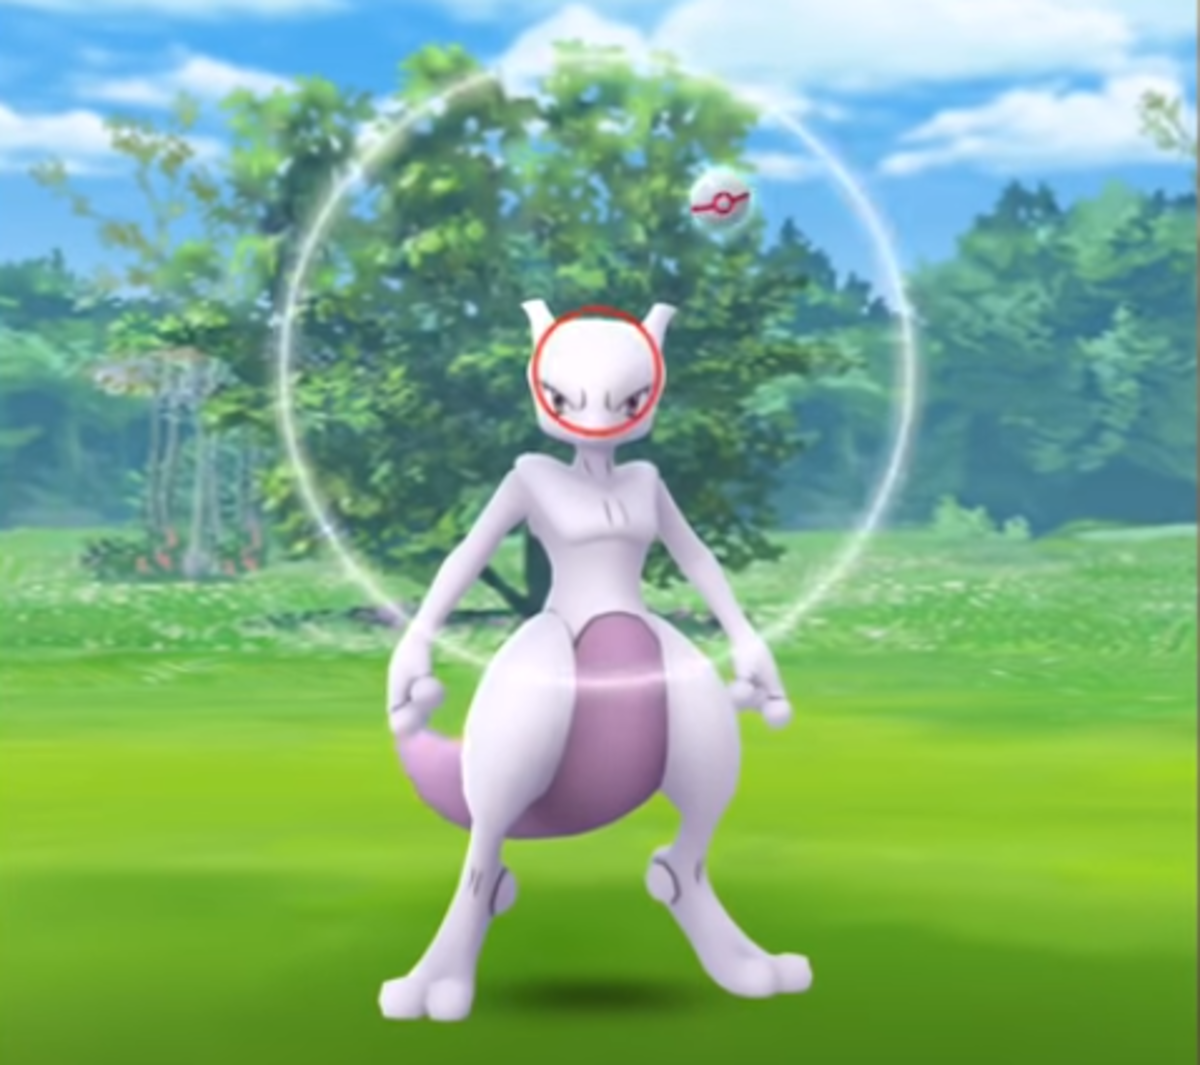 Catching a Mewtwo